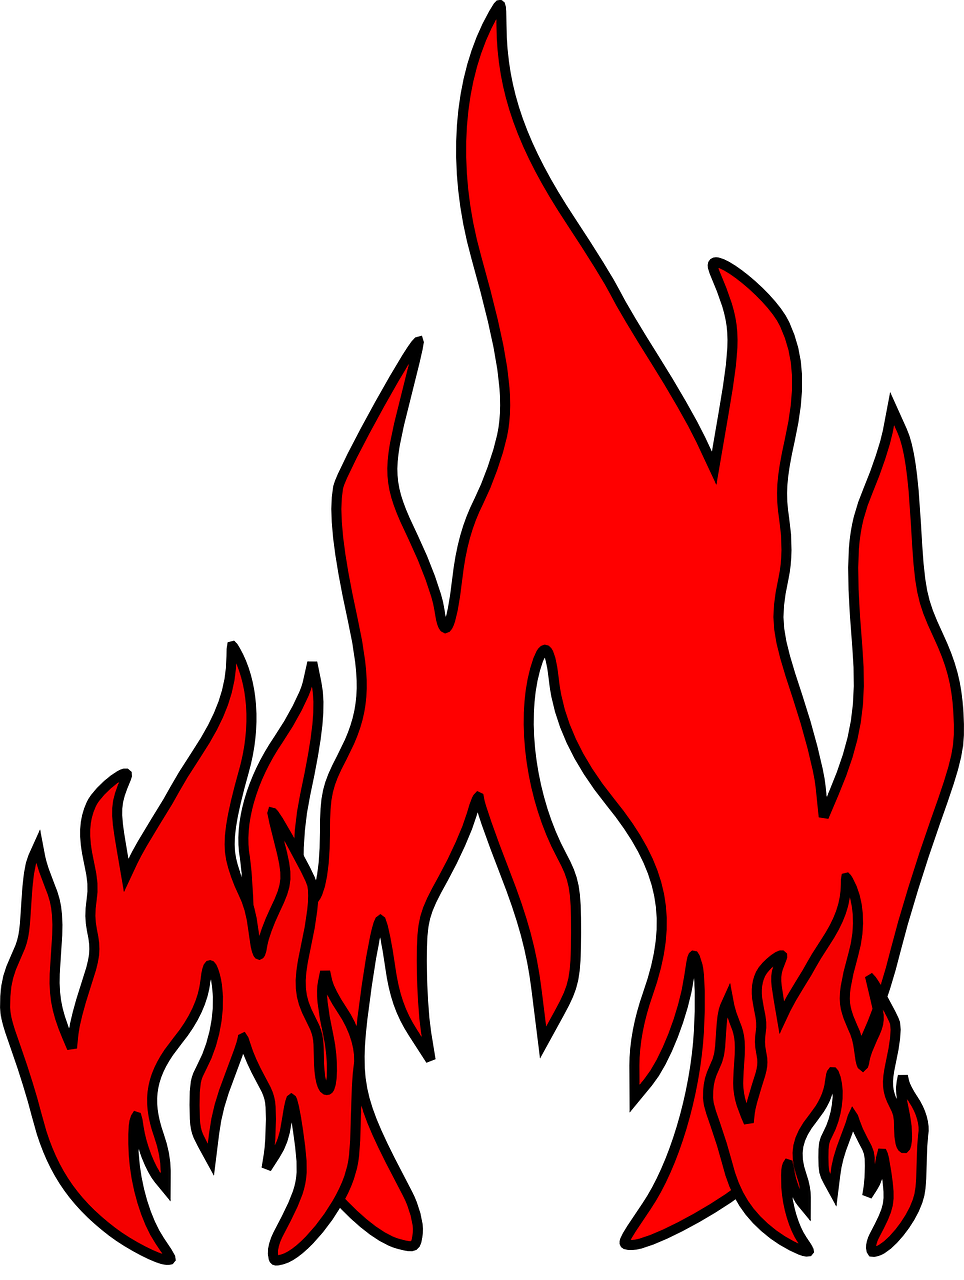 Flames clipart cool fire. Flame stencils printable collection